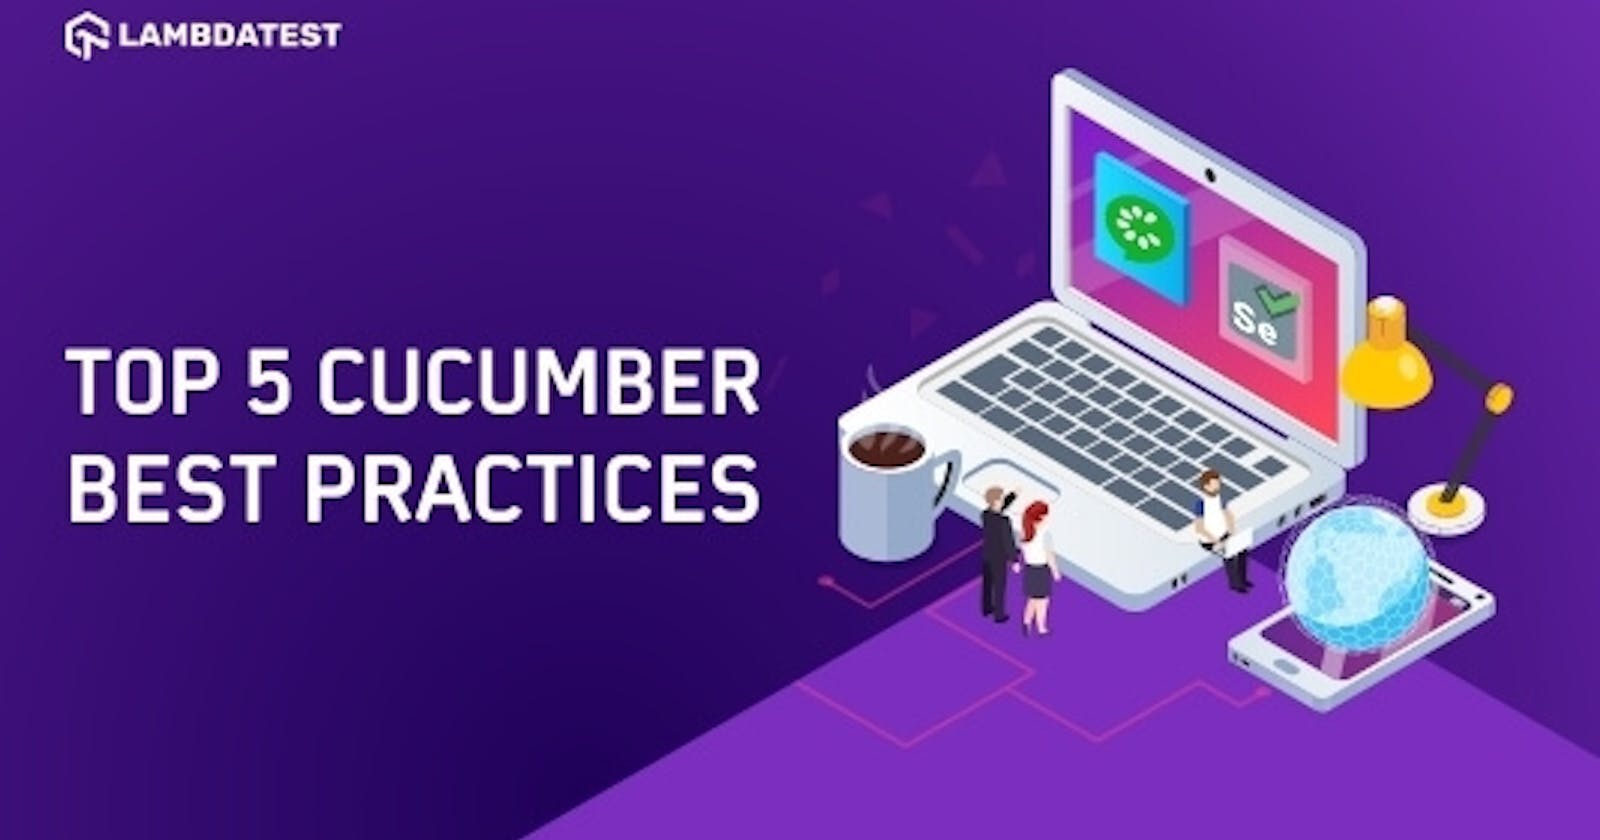 Top 5 Cucumber Best Practices For Selenium Automation